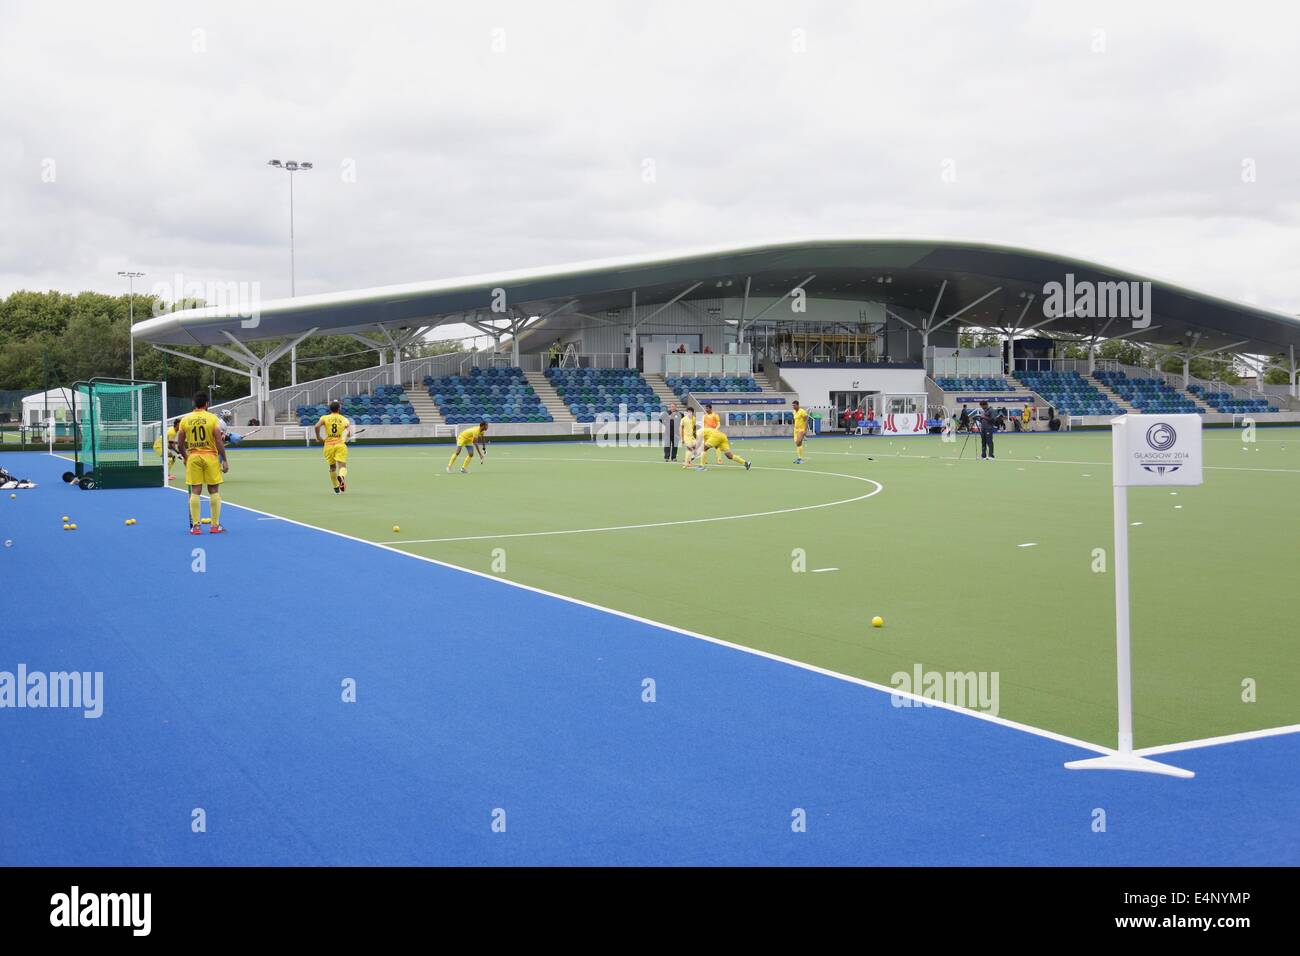 Glasgow National Hockey Centre, Glasgow Green, Glasgow, Scotland, UK, Tuesday, 15th July, 2014. With 8 Days until the 2014 Commonwealth Games Opening Ceremony teams are using the venues for training with members of Team India seen here Stock Photo